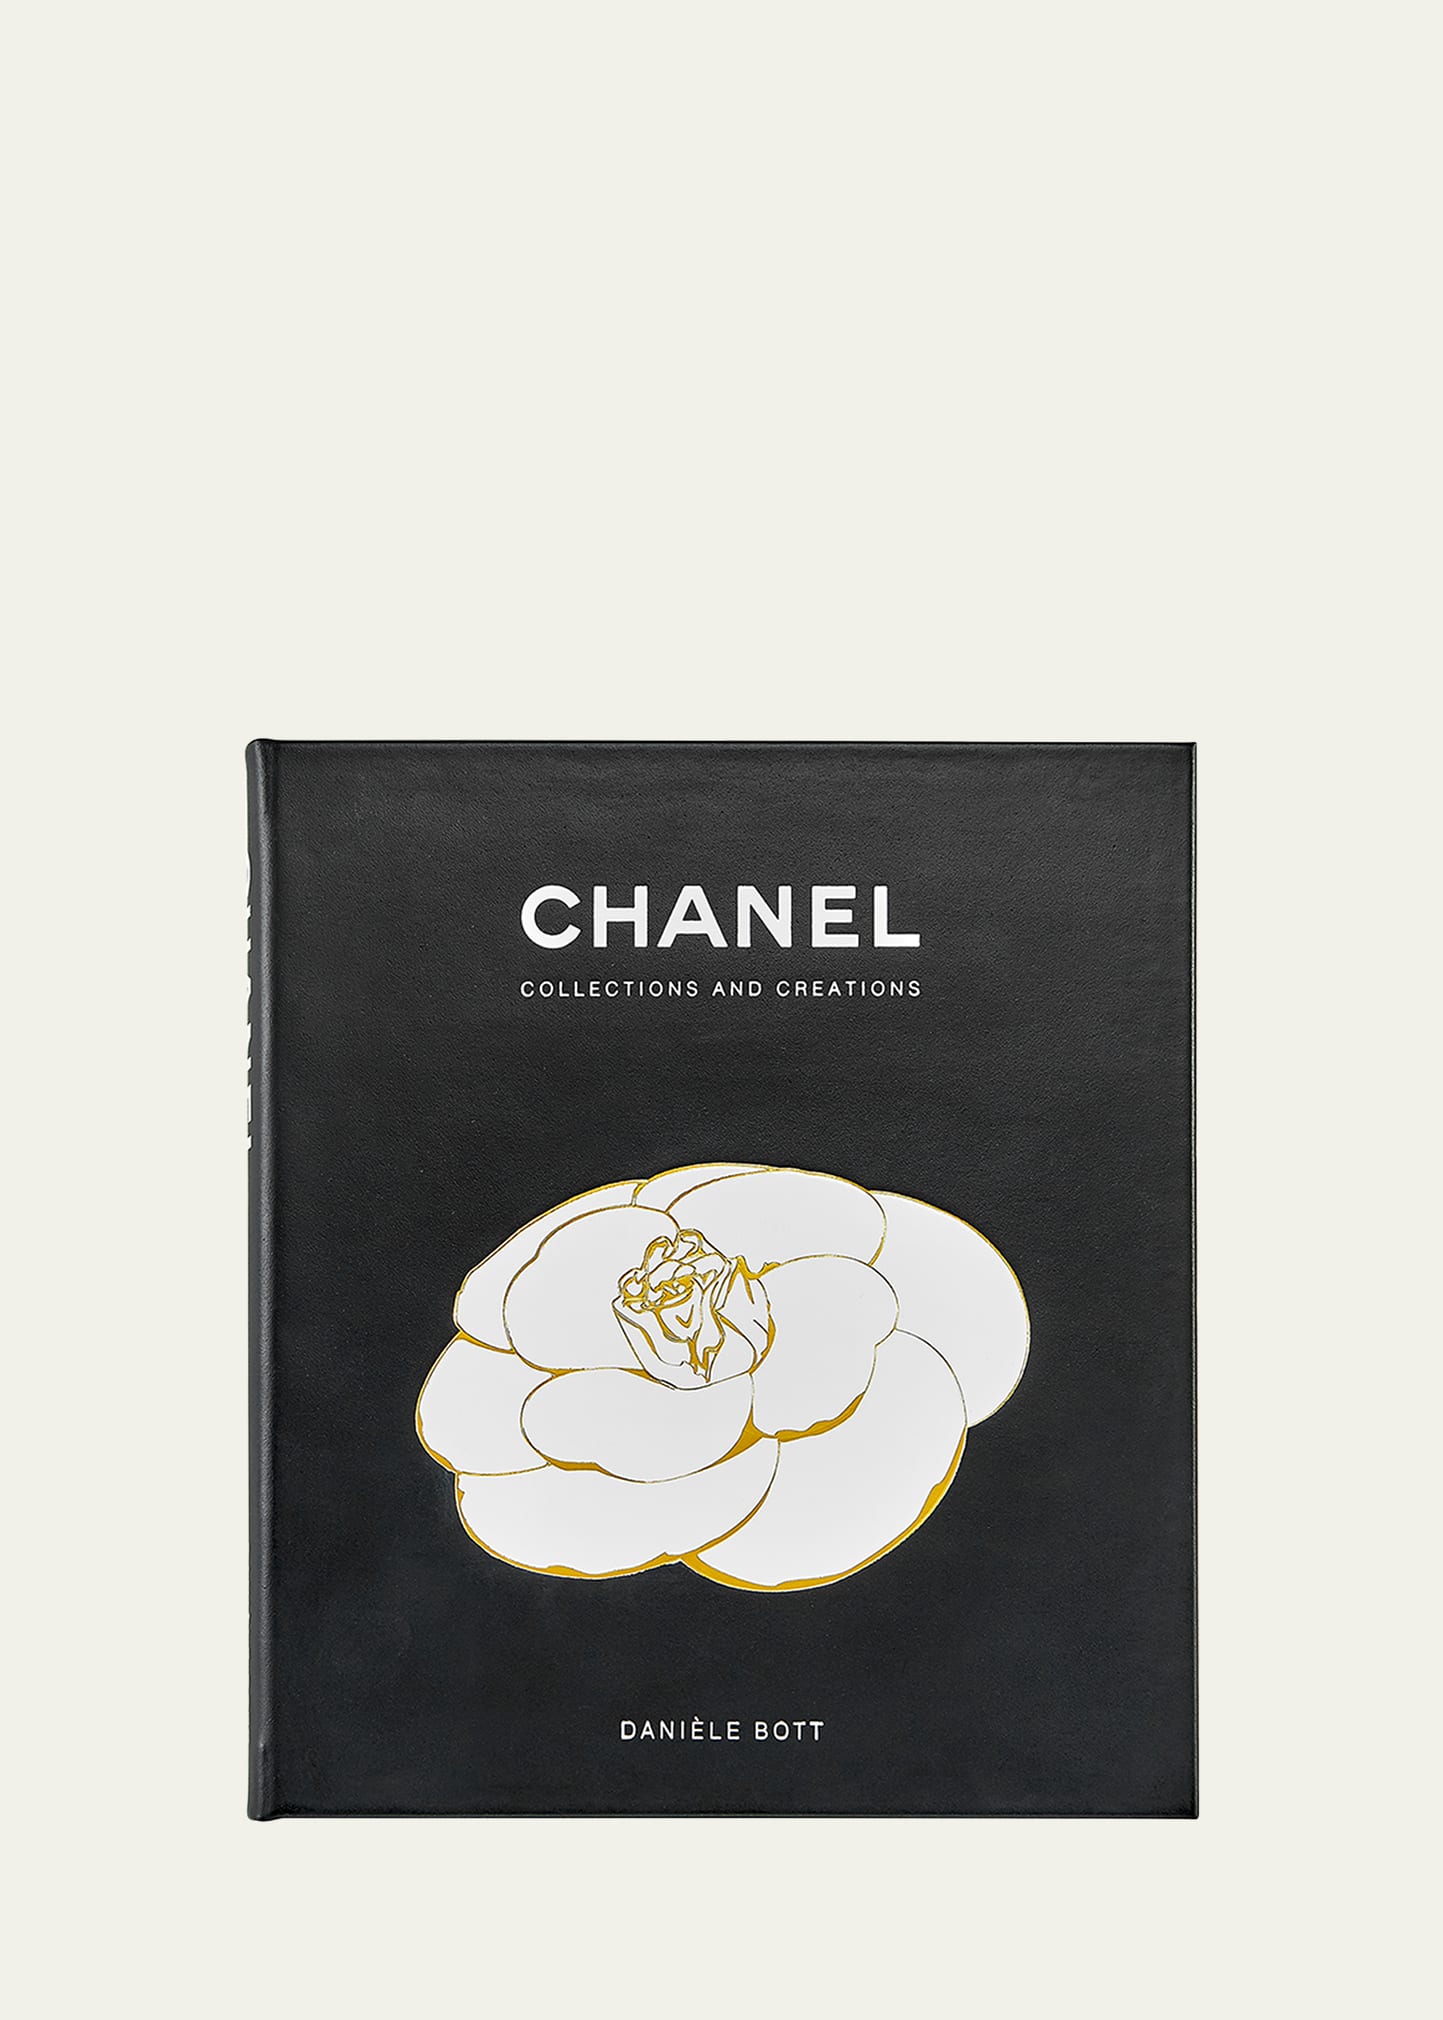 "Chanel Collections and Creations" Book